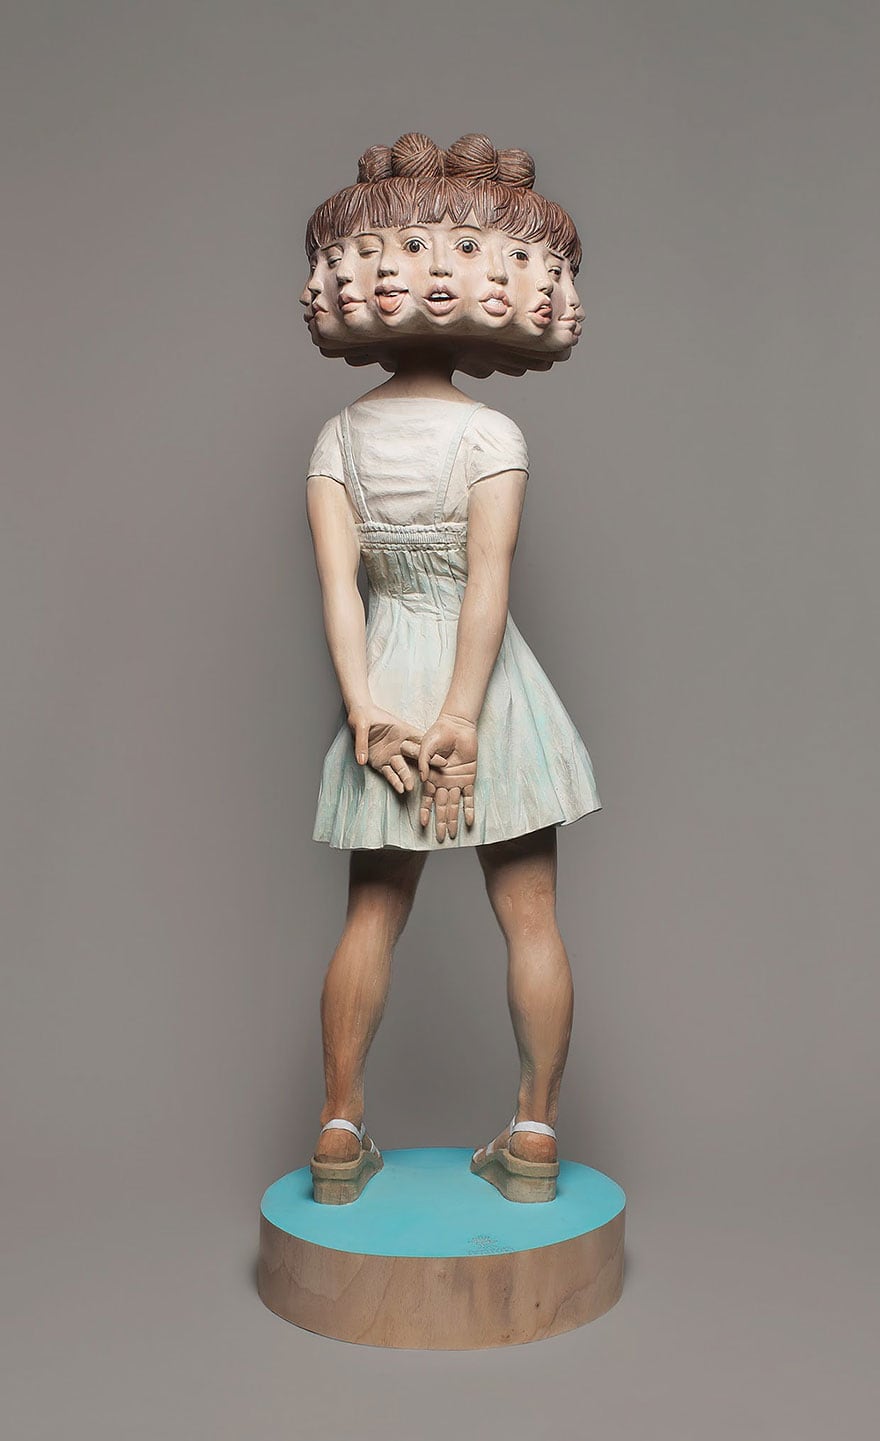 wood-sculptures-of-bizarrely-twisted-characters-by-a-surreal-japanese-artist-10